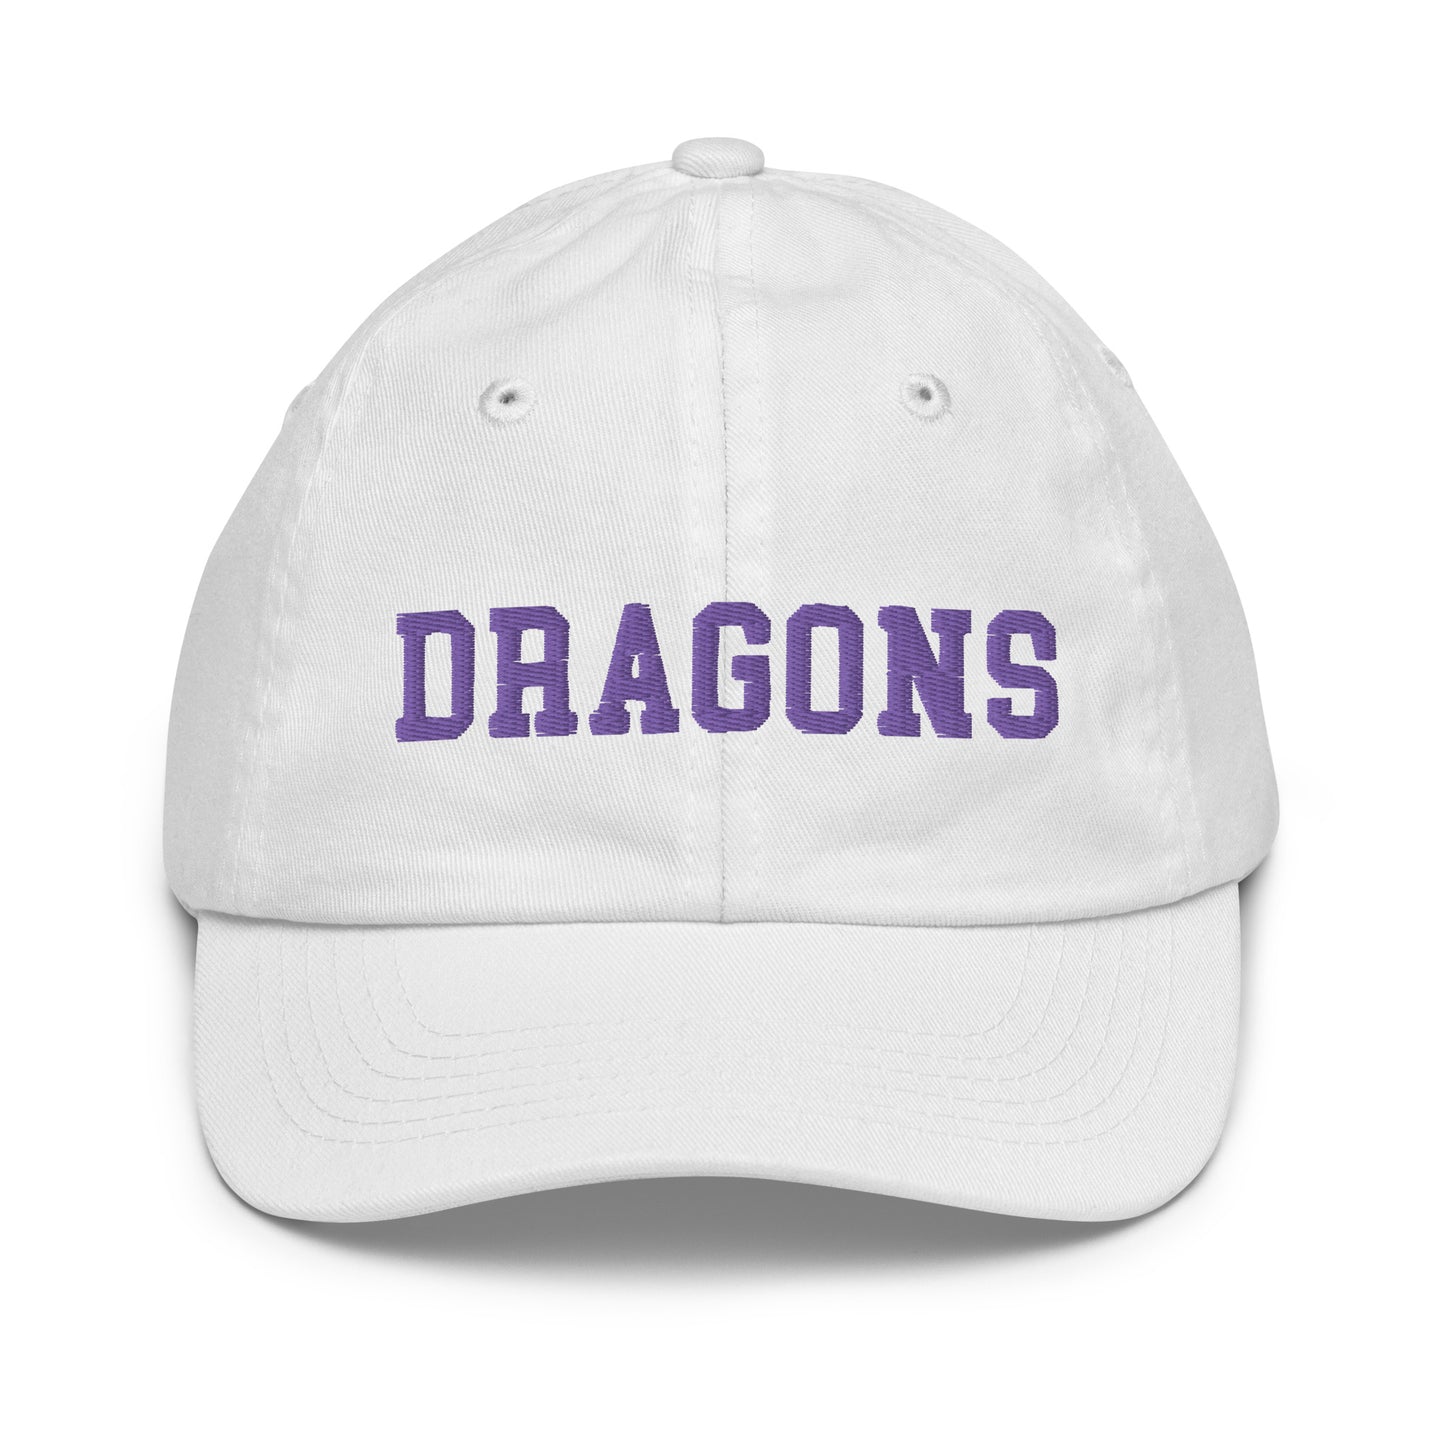 Dragons Youth Hat